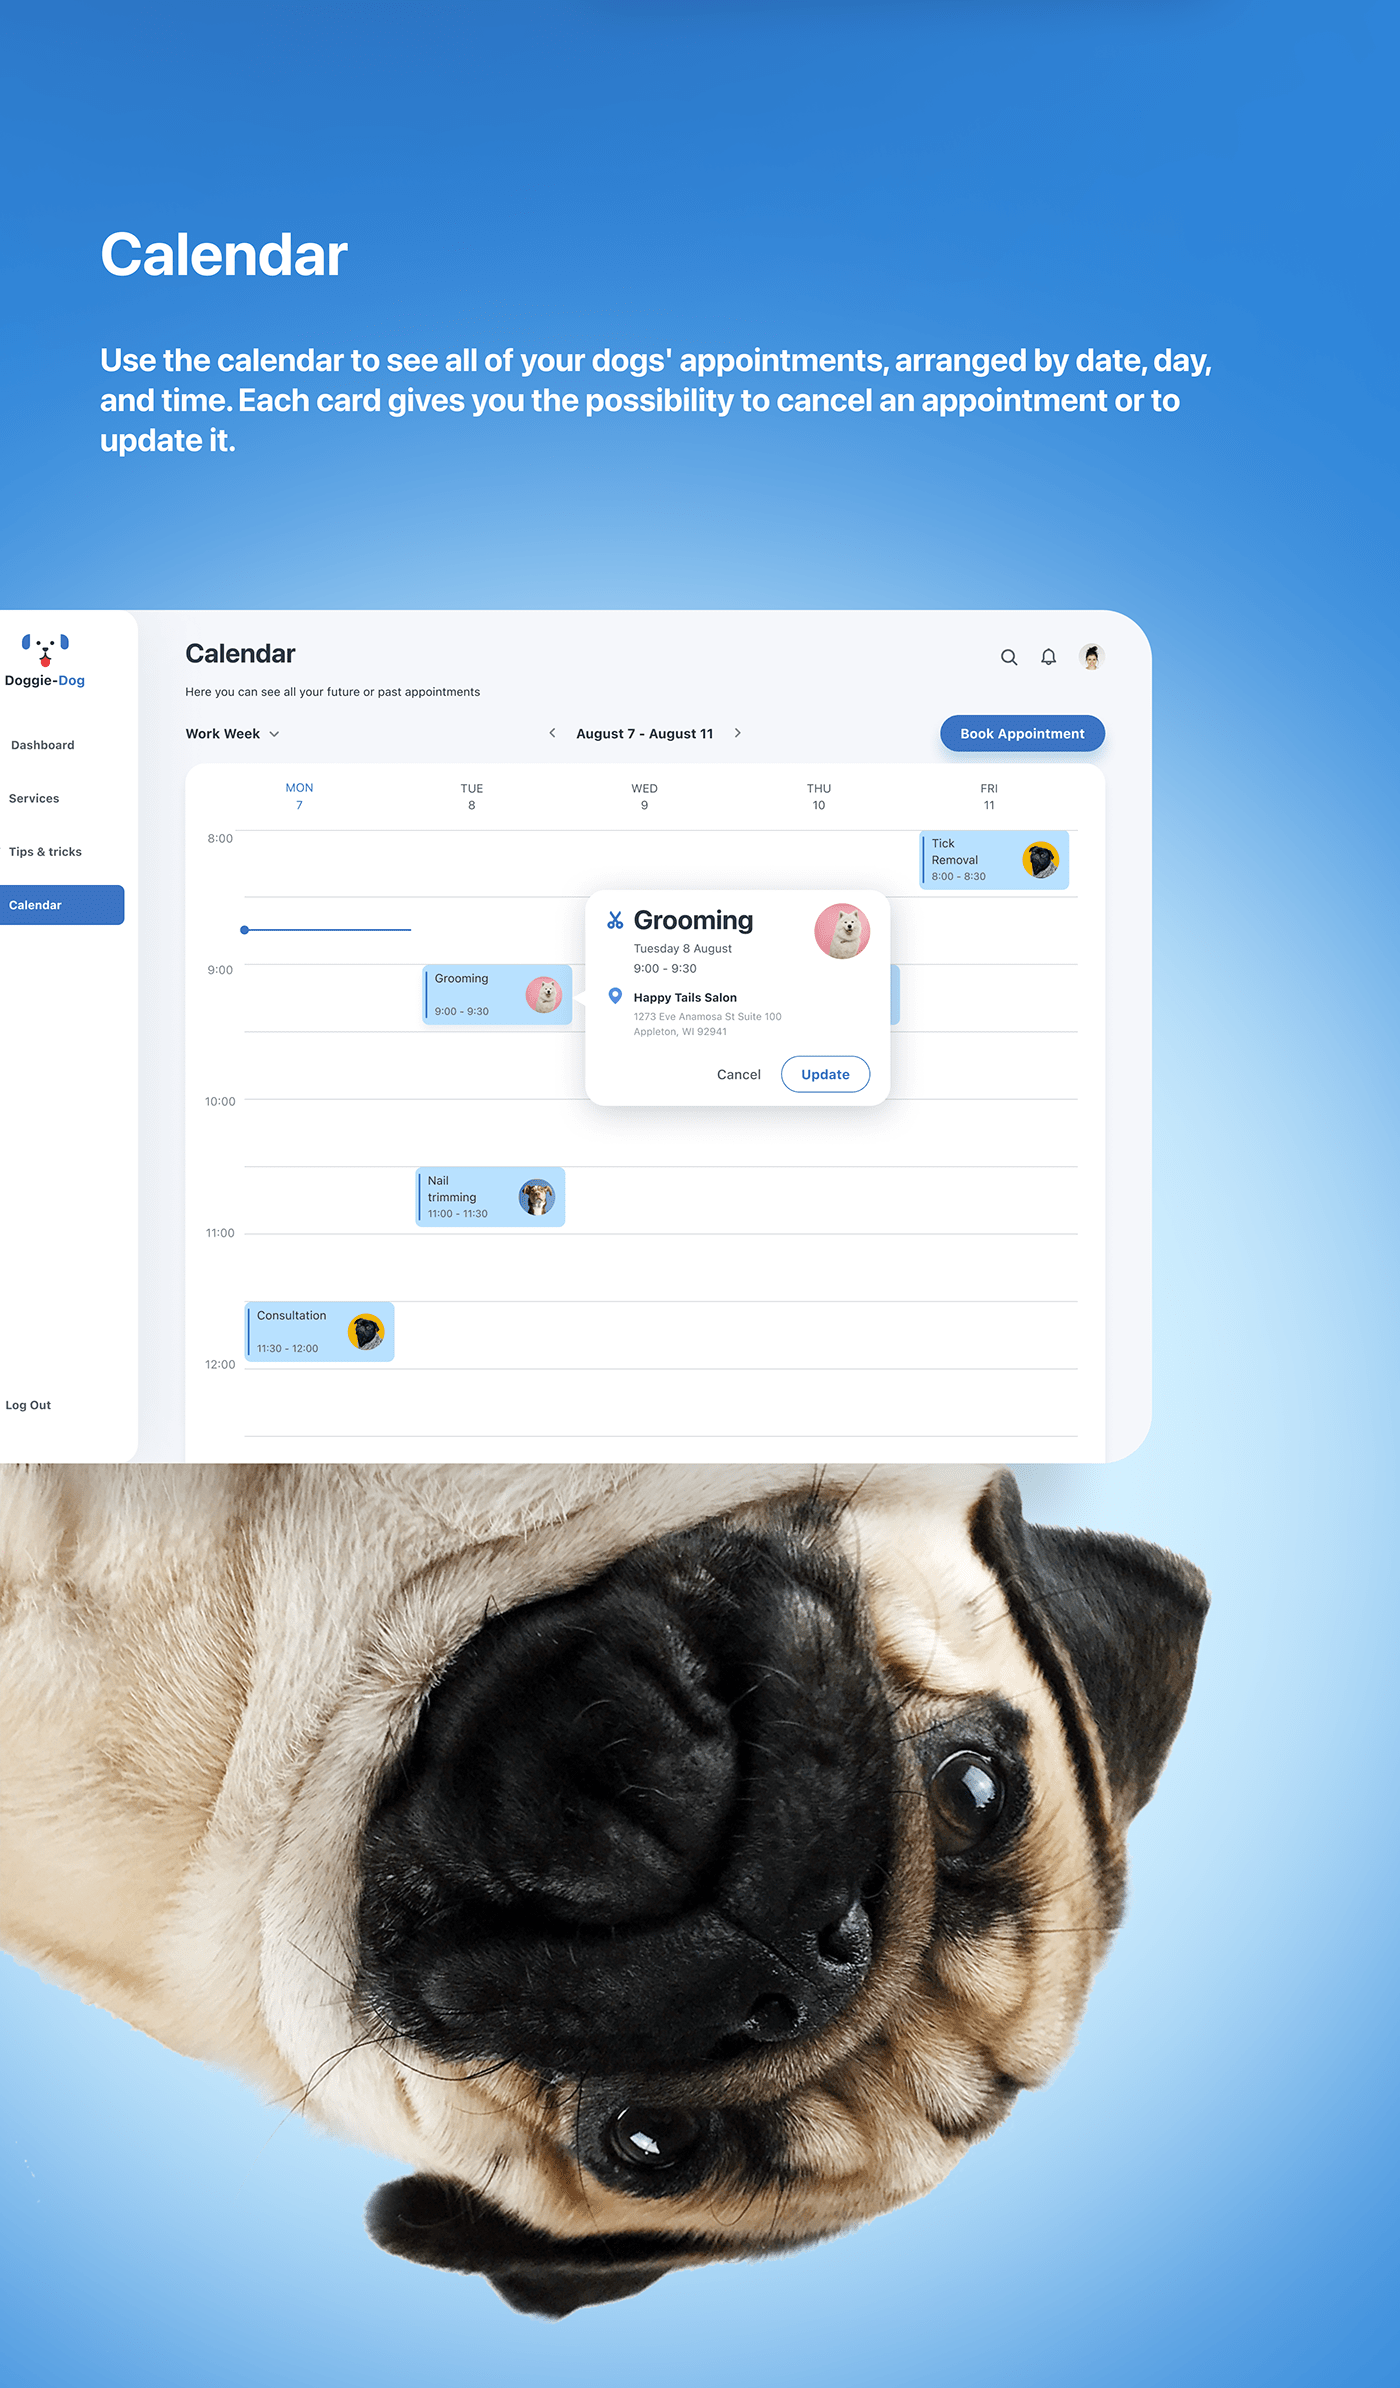 Appointment calendar dashboard doctor dogs Figma medical Pet veterinary webapp